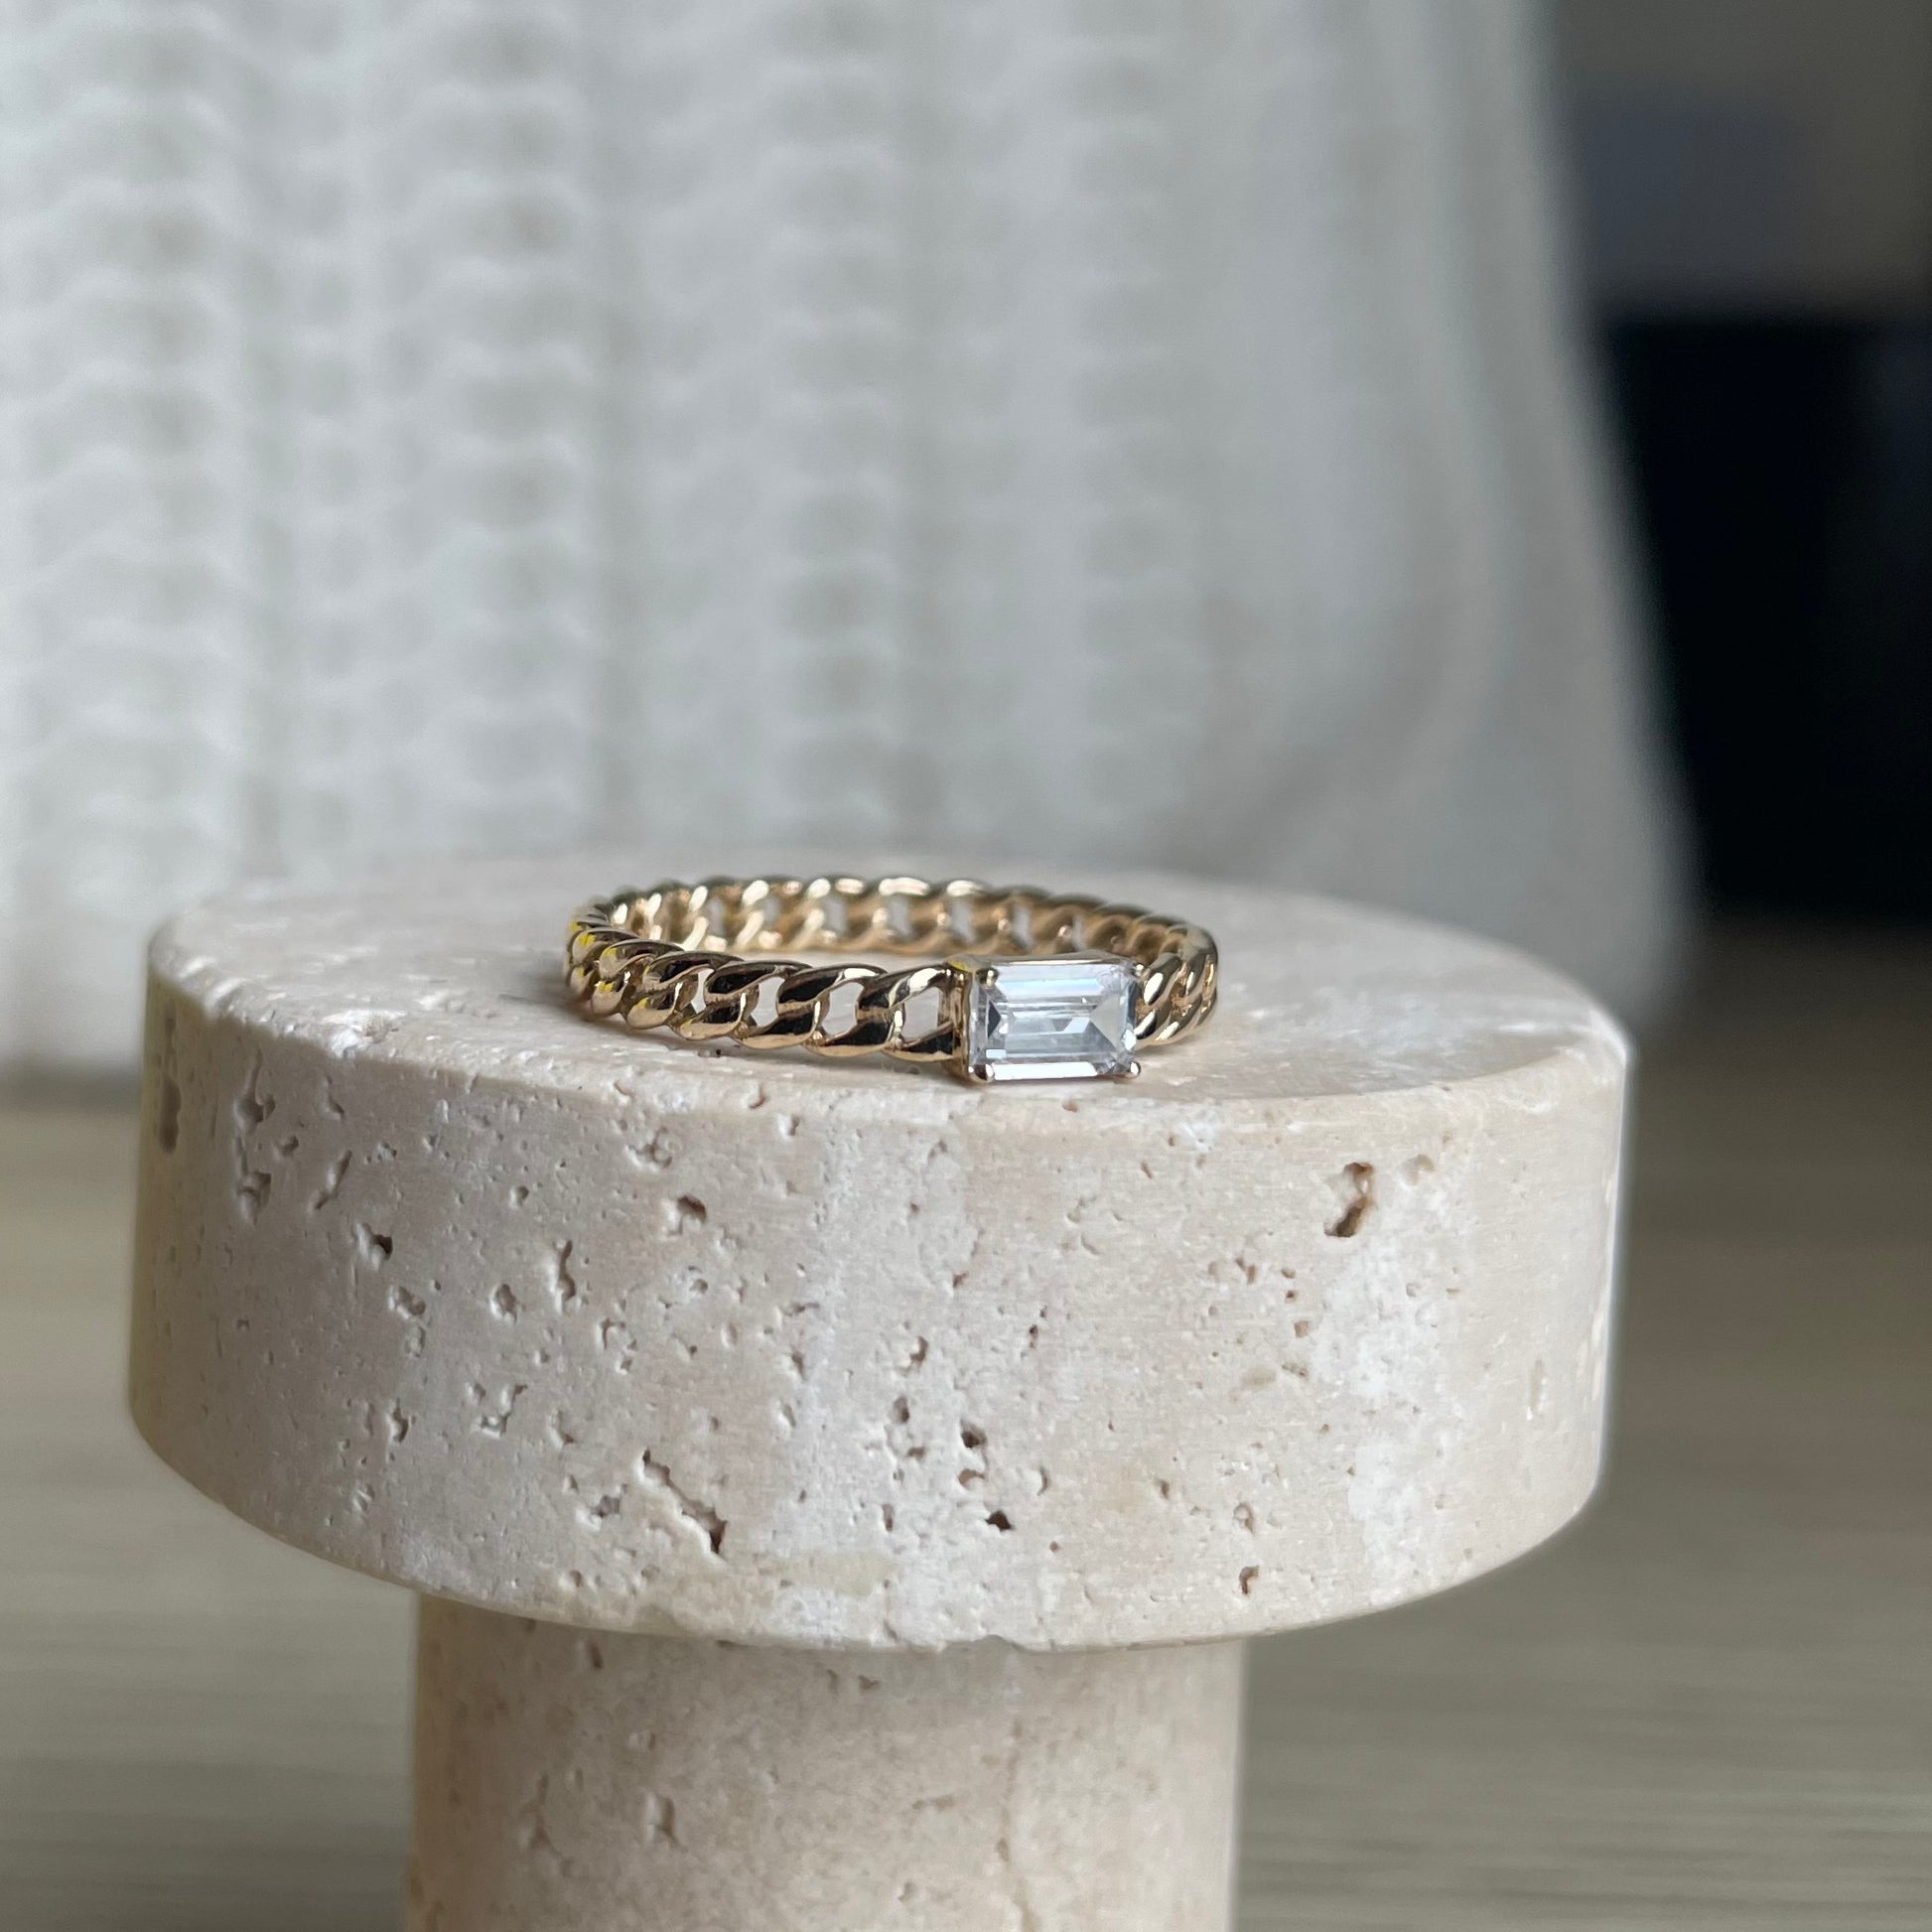 "Nina" Curb chain Link Diamond Ring - - Jewelry - Goldie Paris Jewelry - Ring stackable statement